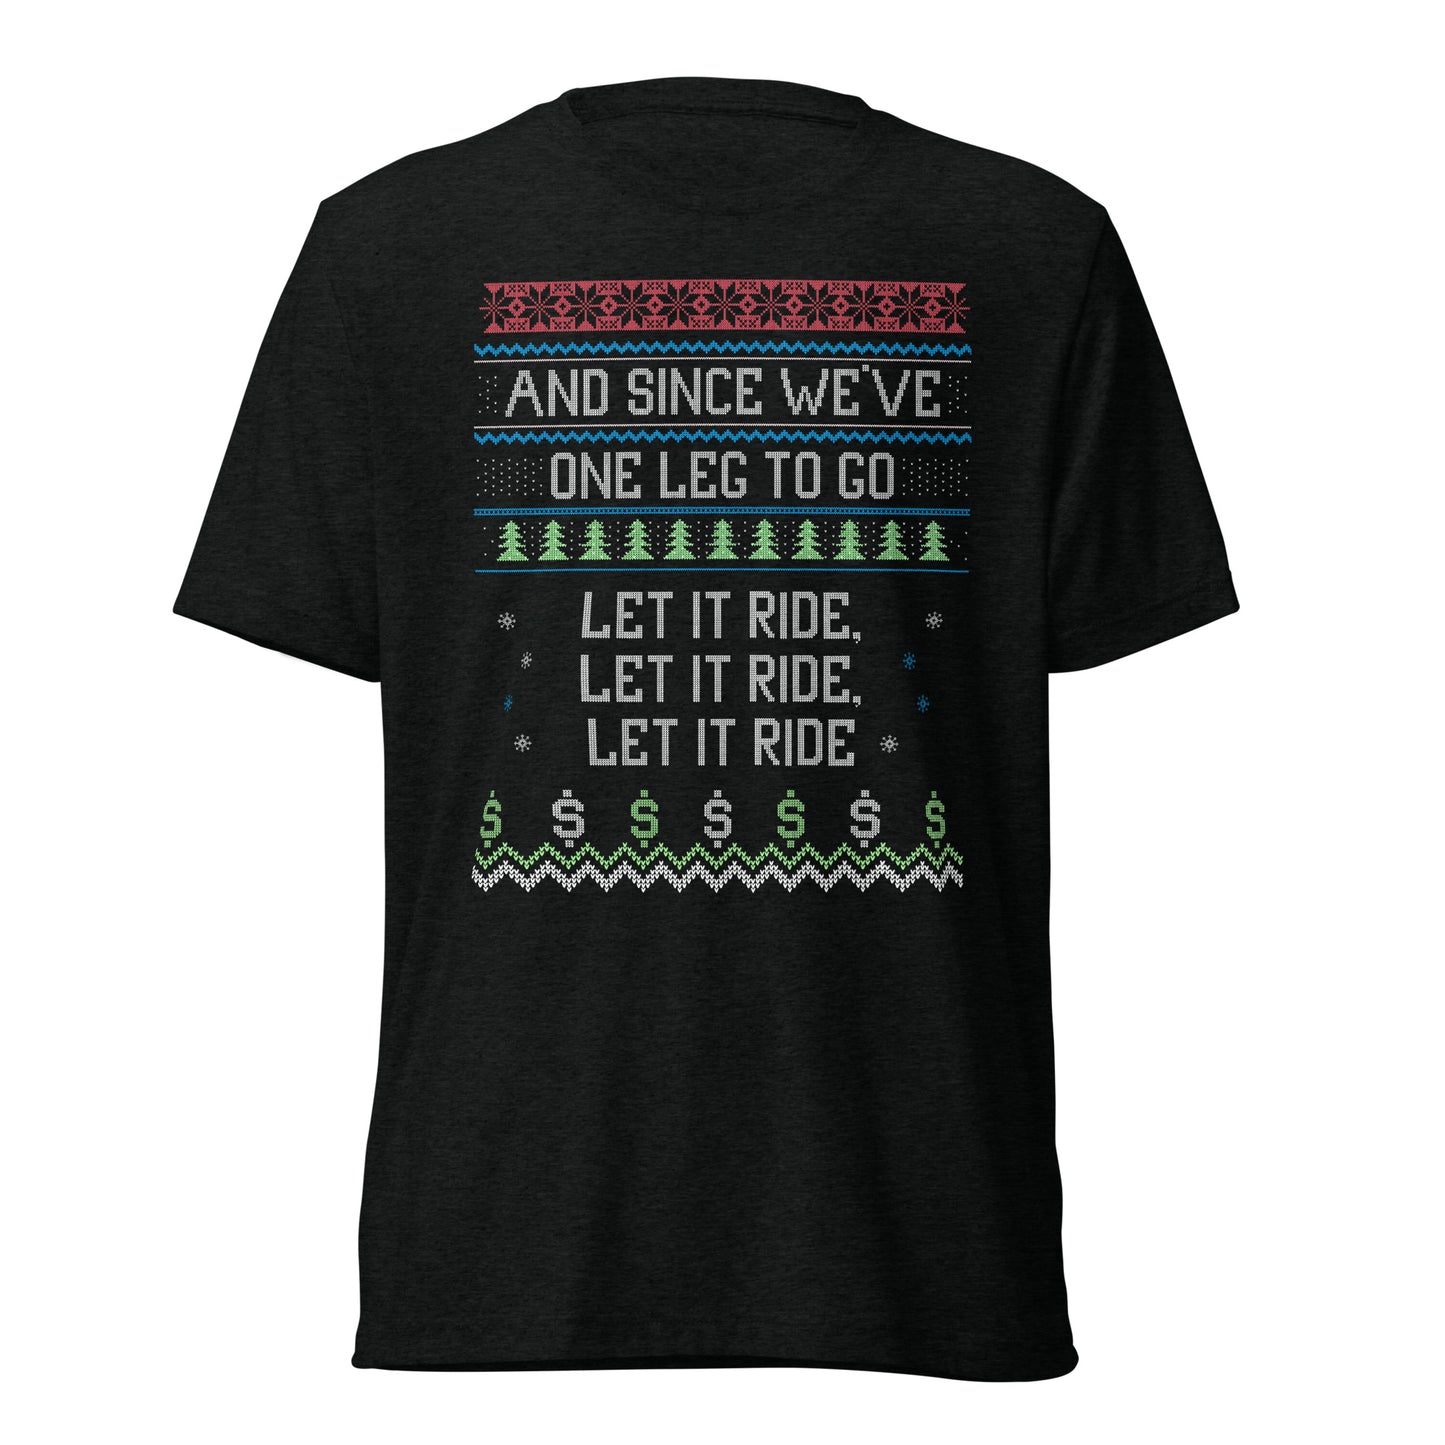 Christmas Shirt - SGPN - One Leg to Go... Let it Ride, Let it Ride, Let it Ride - Short sleeve t-shirt